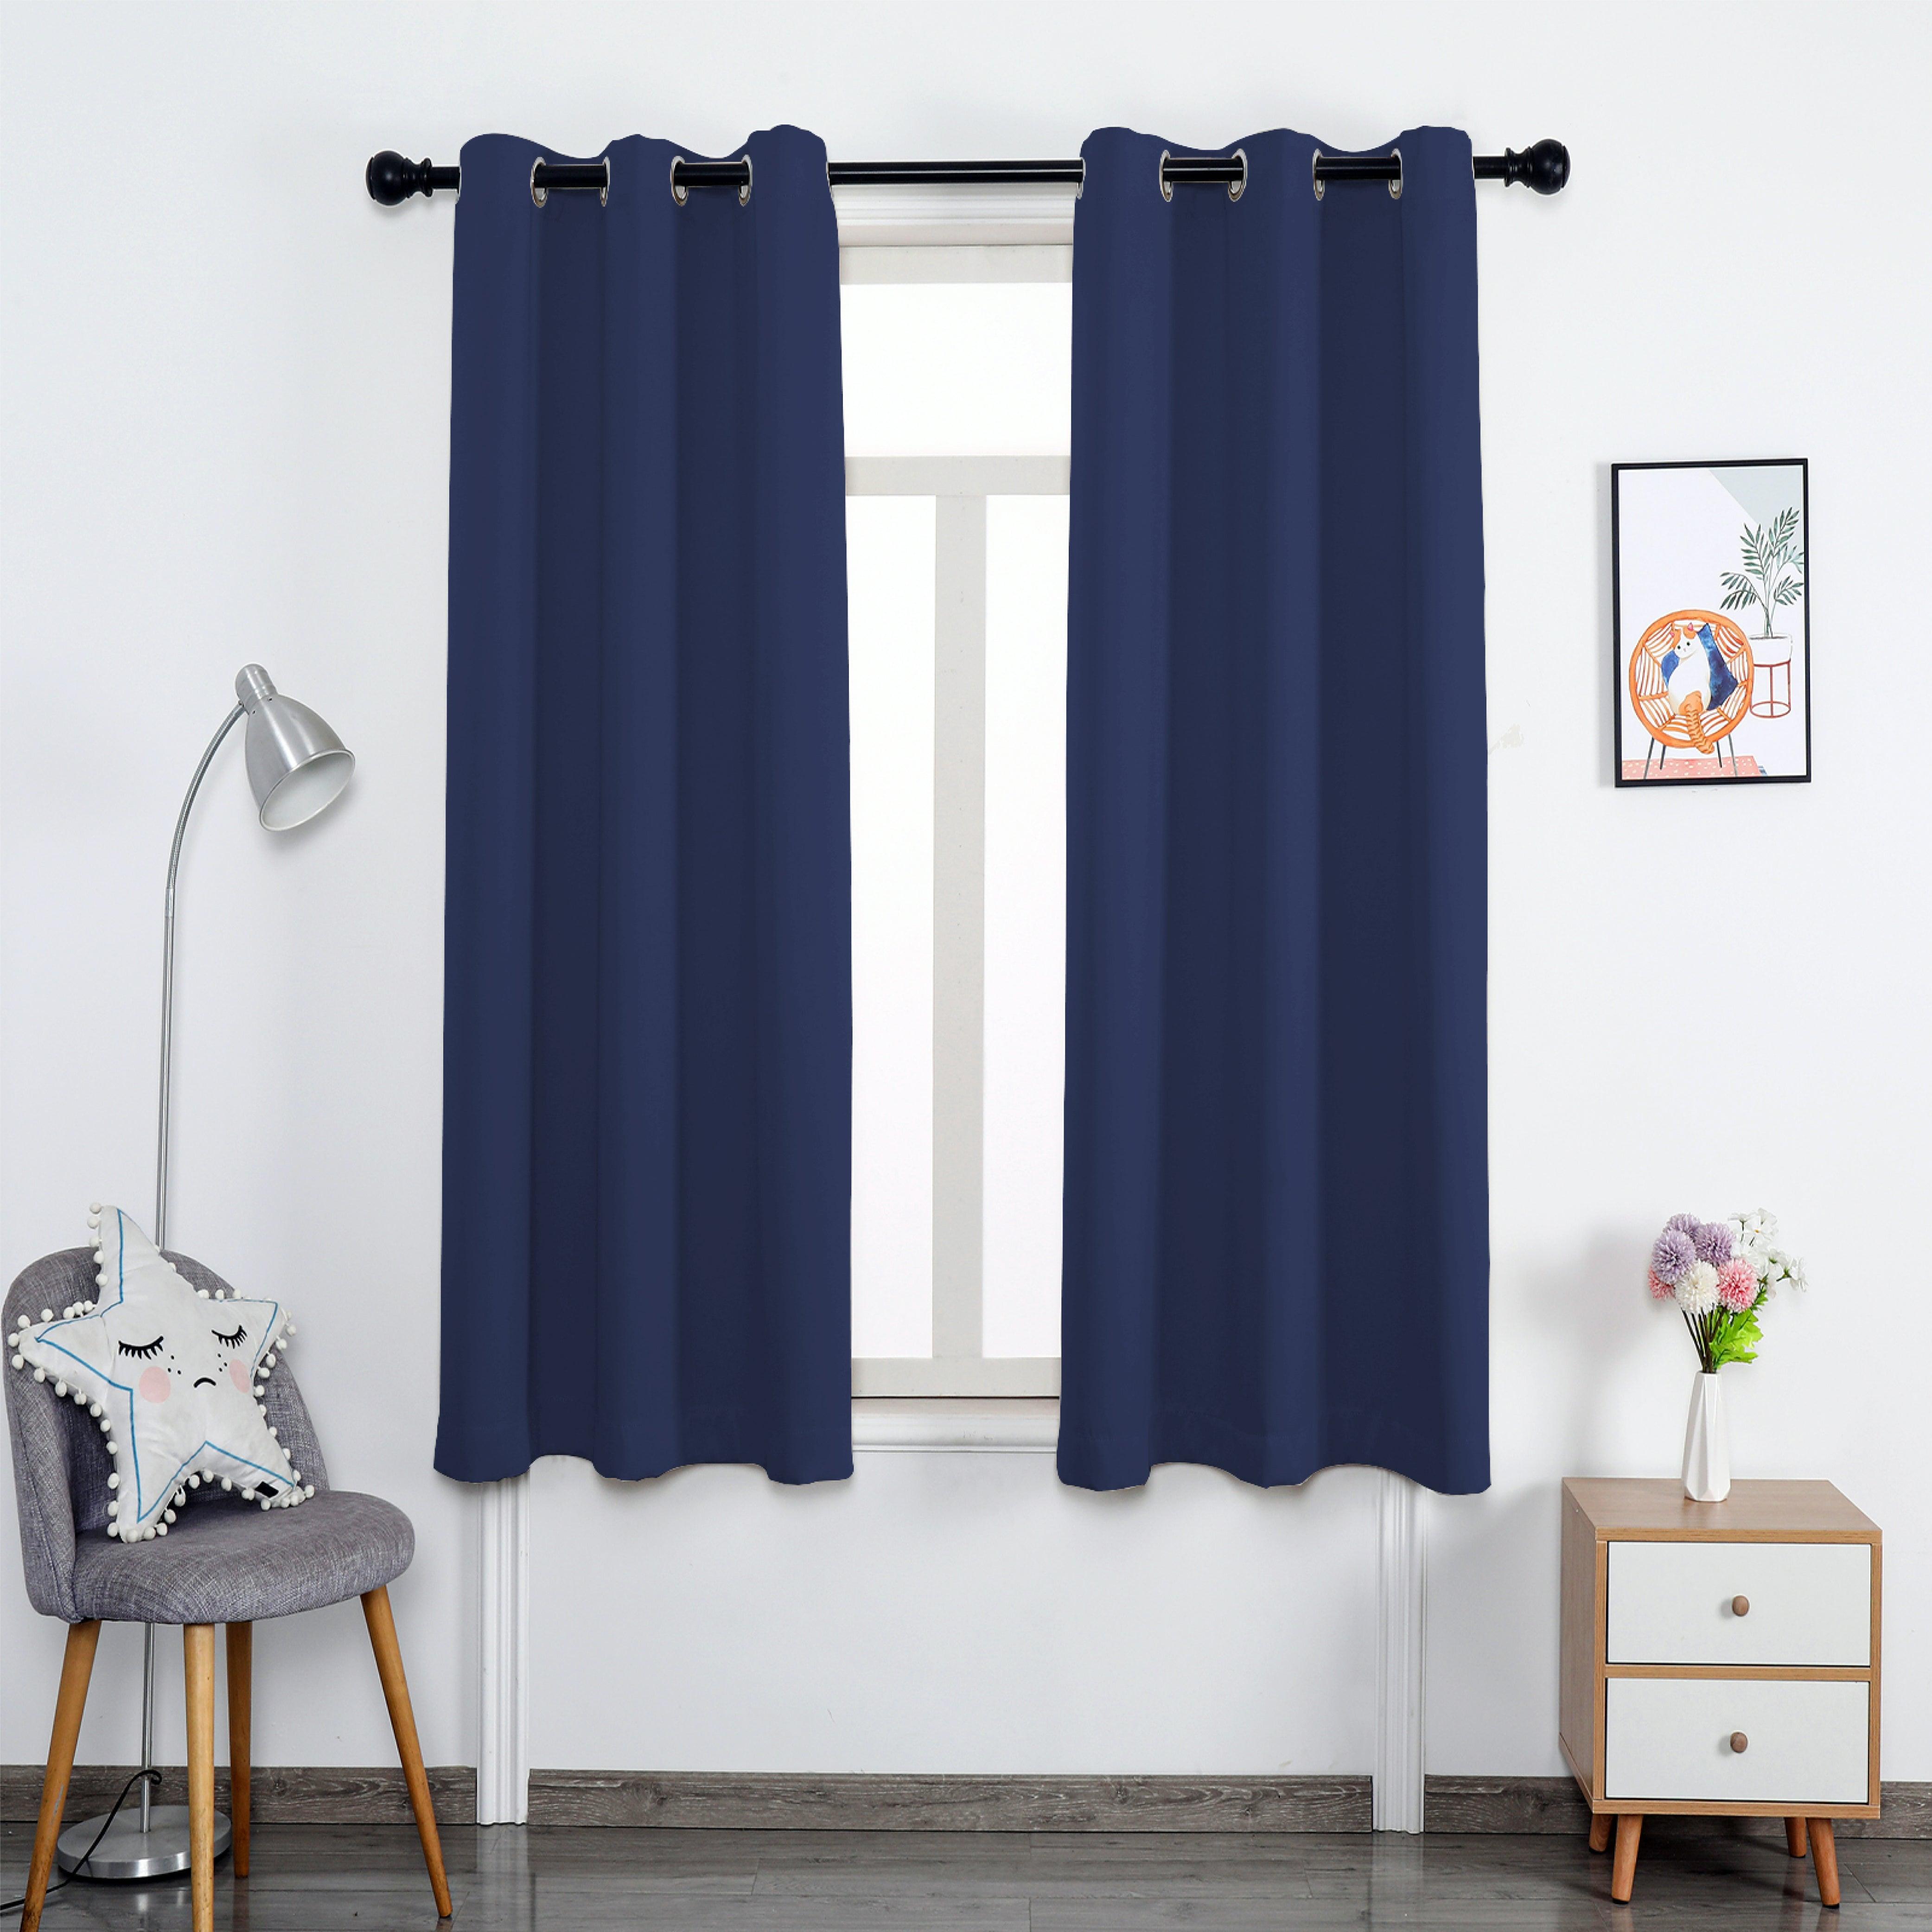 Hyper Cover 3-Layers Blockout Curtains Navy | Window Curtains | Brilliant Home Living